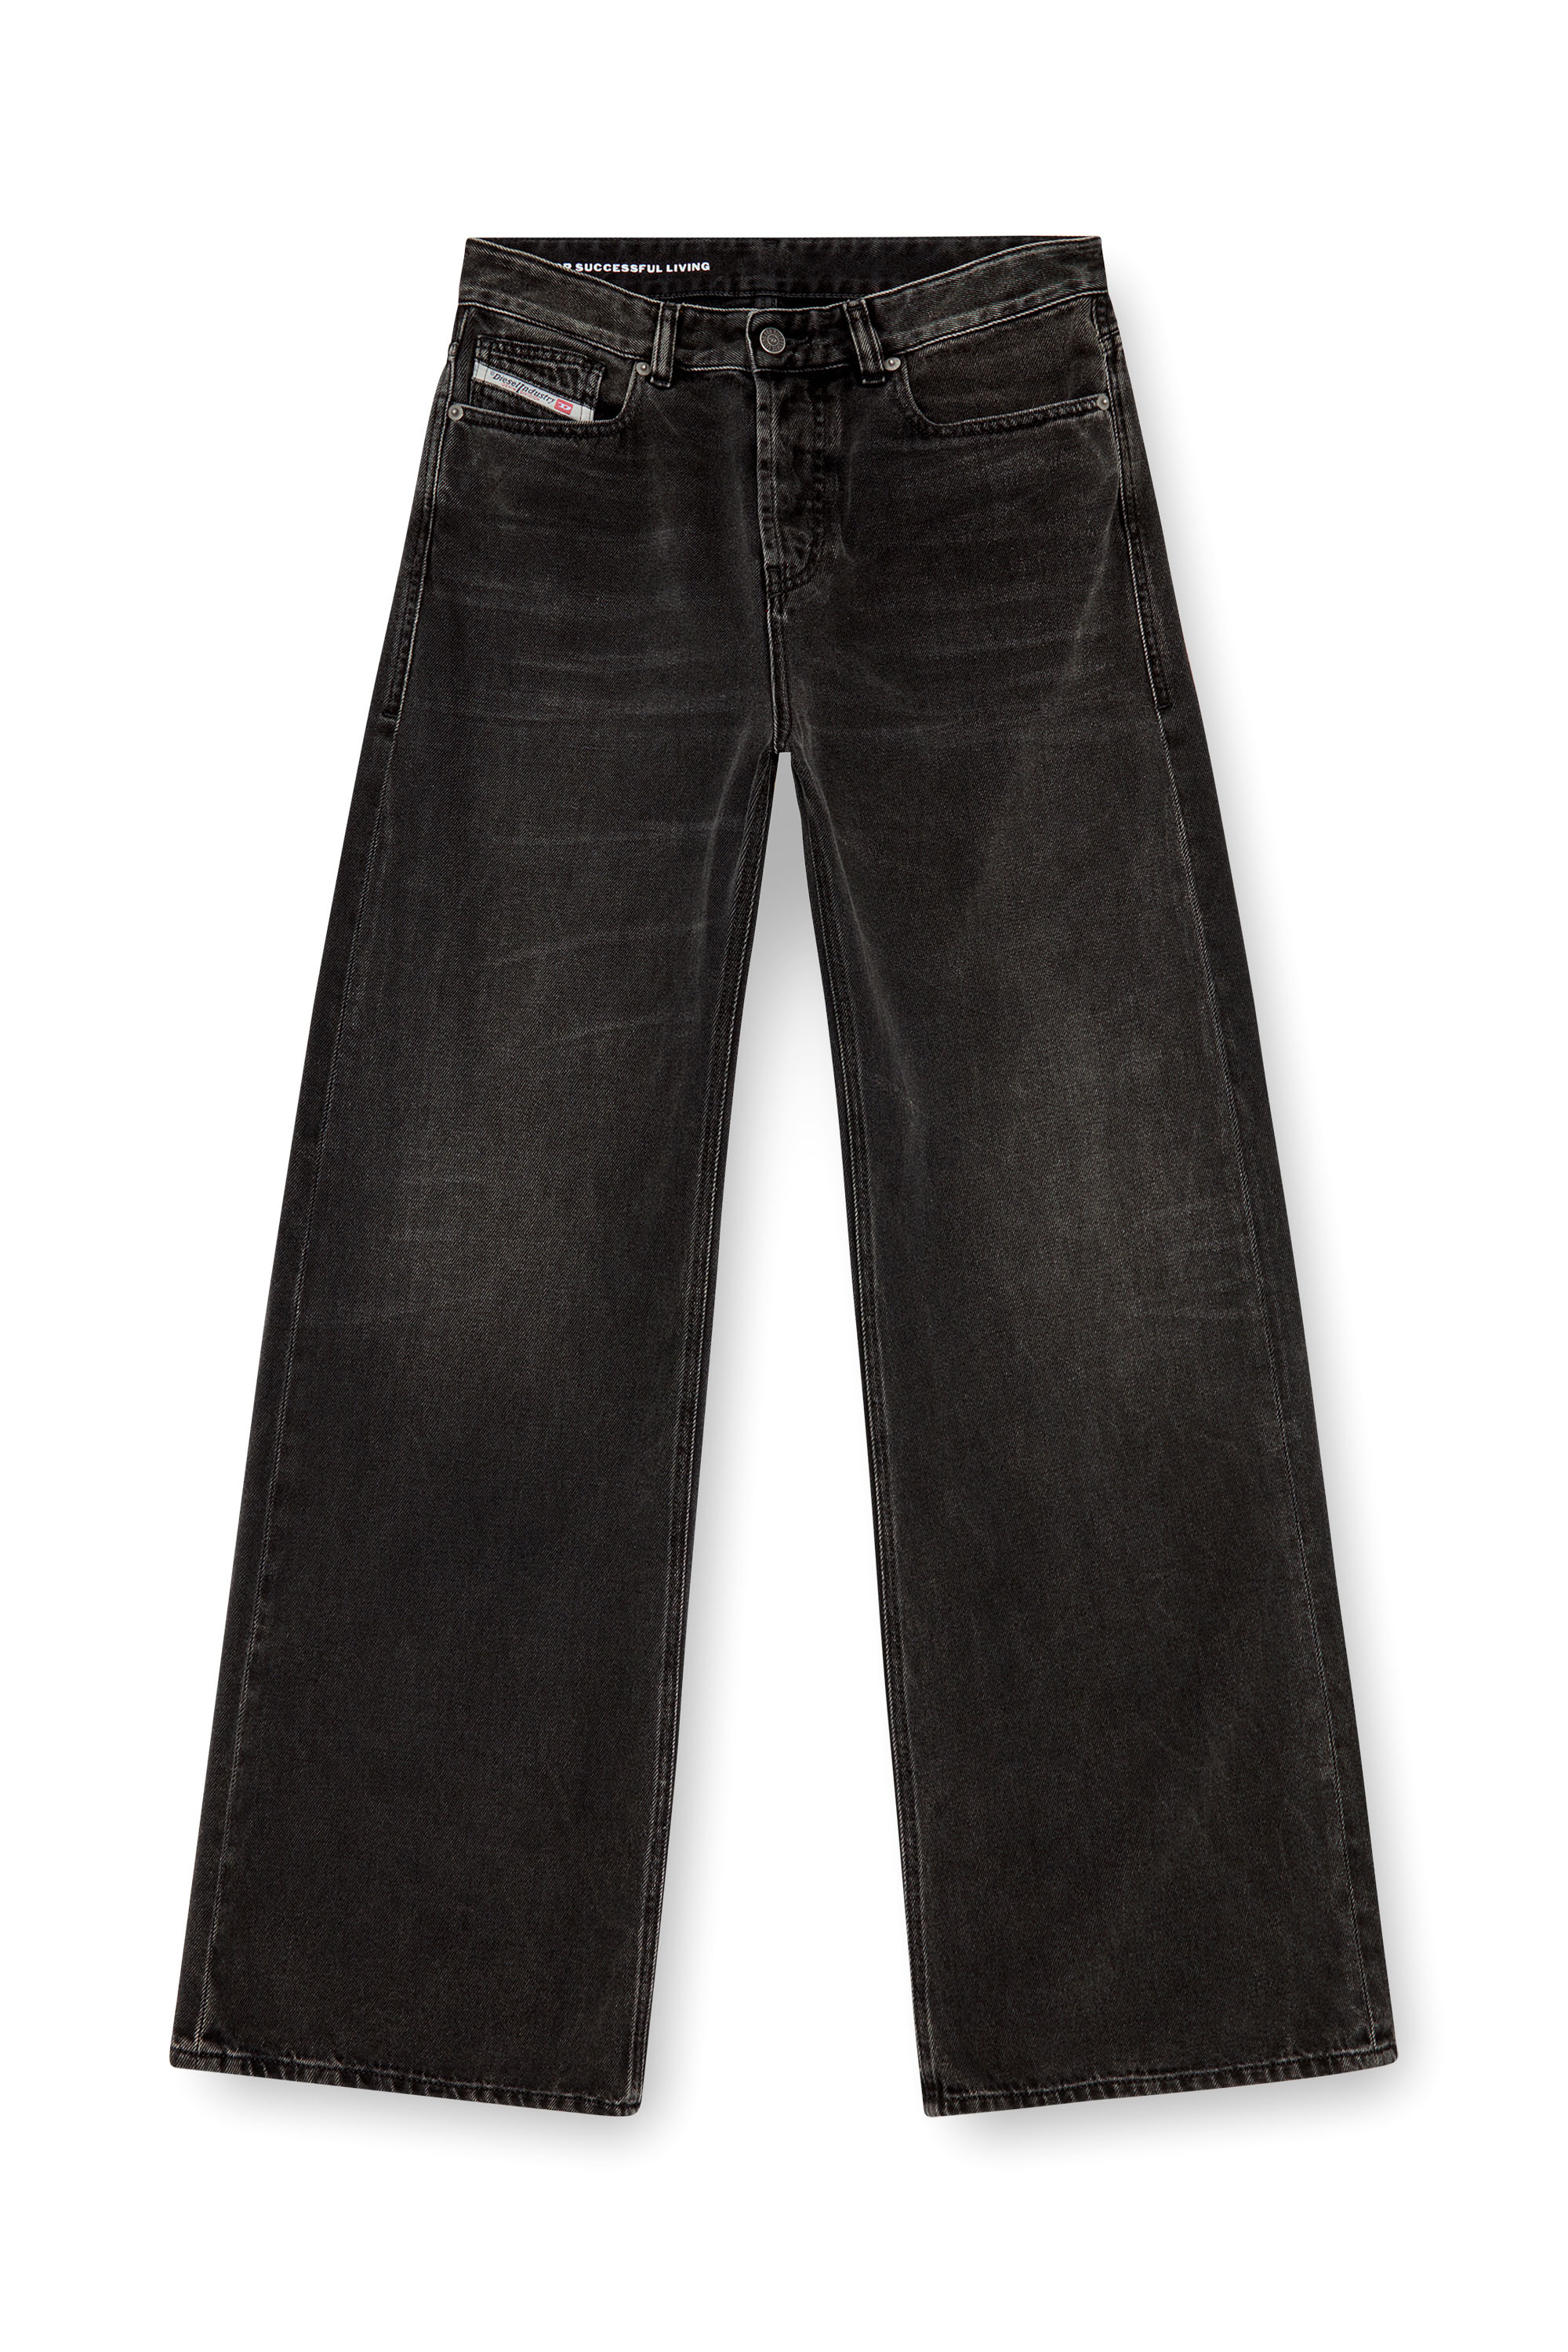 Diesel - Straight Jeans 1996 D-Sire 09J96, Mujer Straight Jeans - 1996 D-Sire in Negro - Image 5